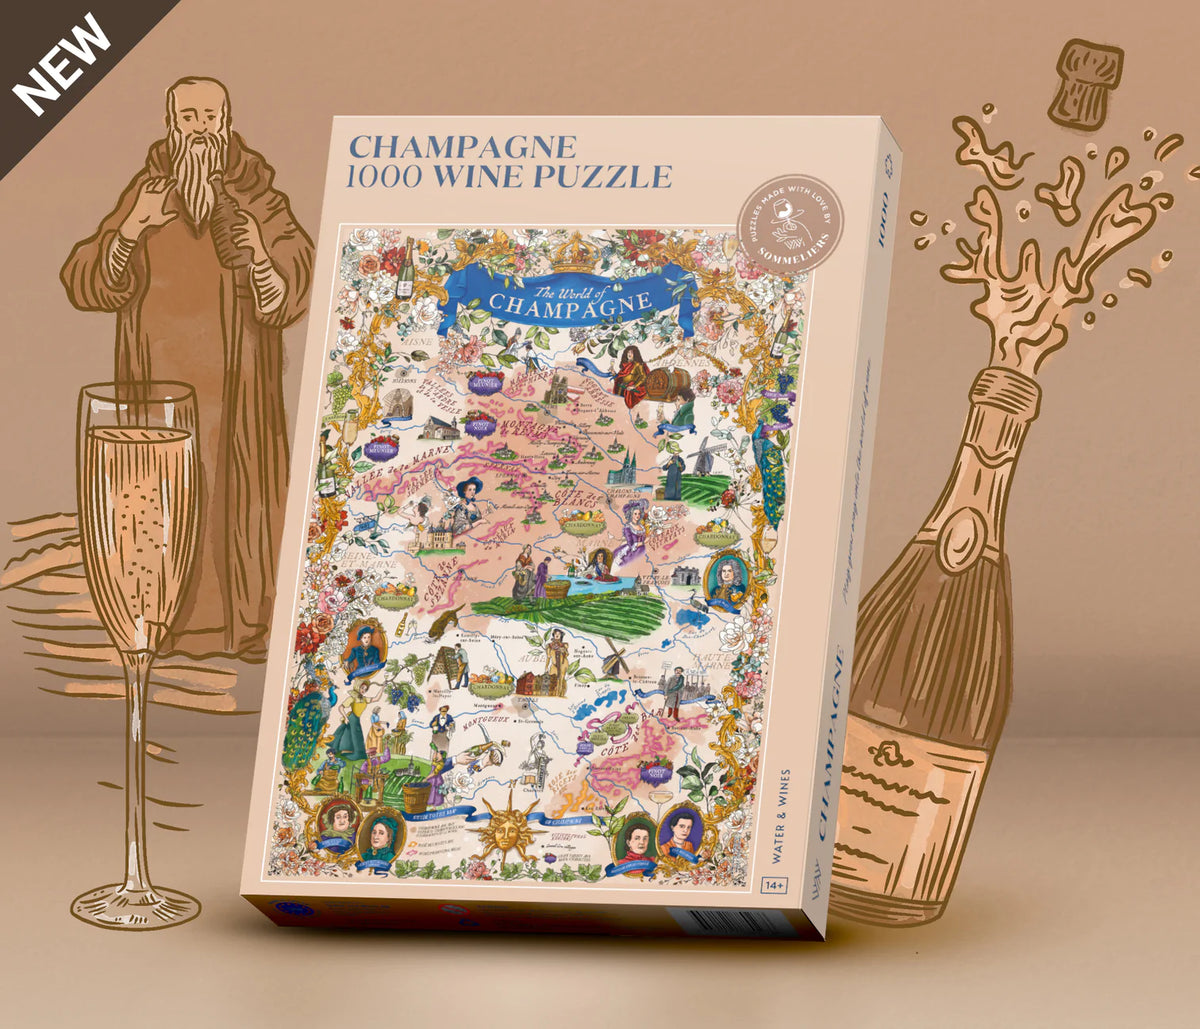 Puzzle of Champagne, a wine region in France. Champagne bottle and a glass of champagne in background